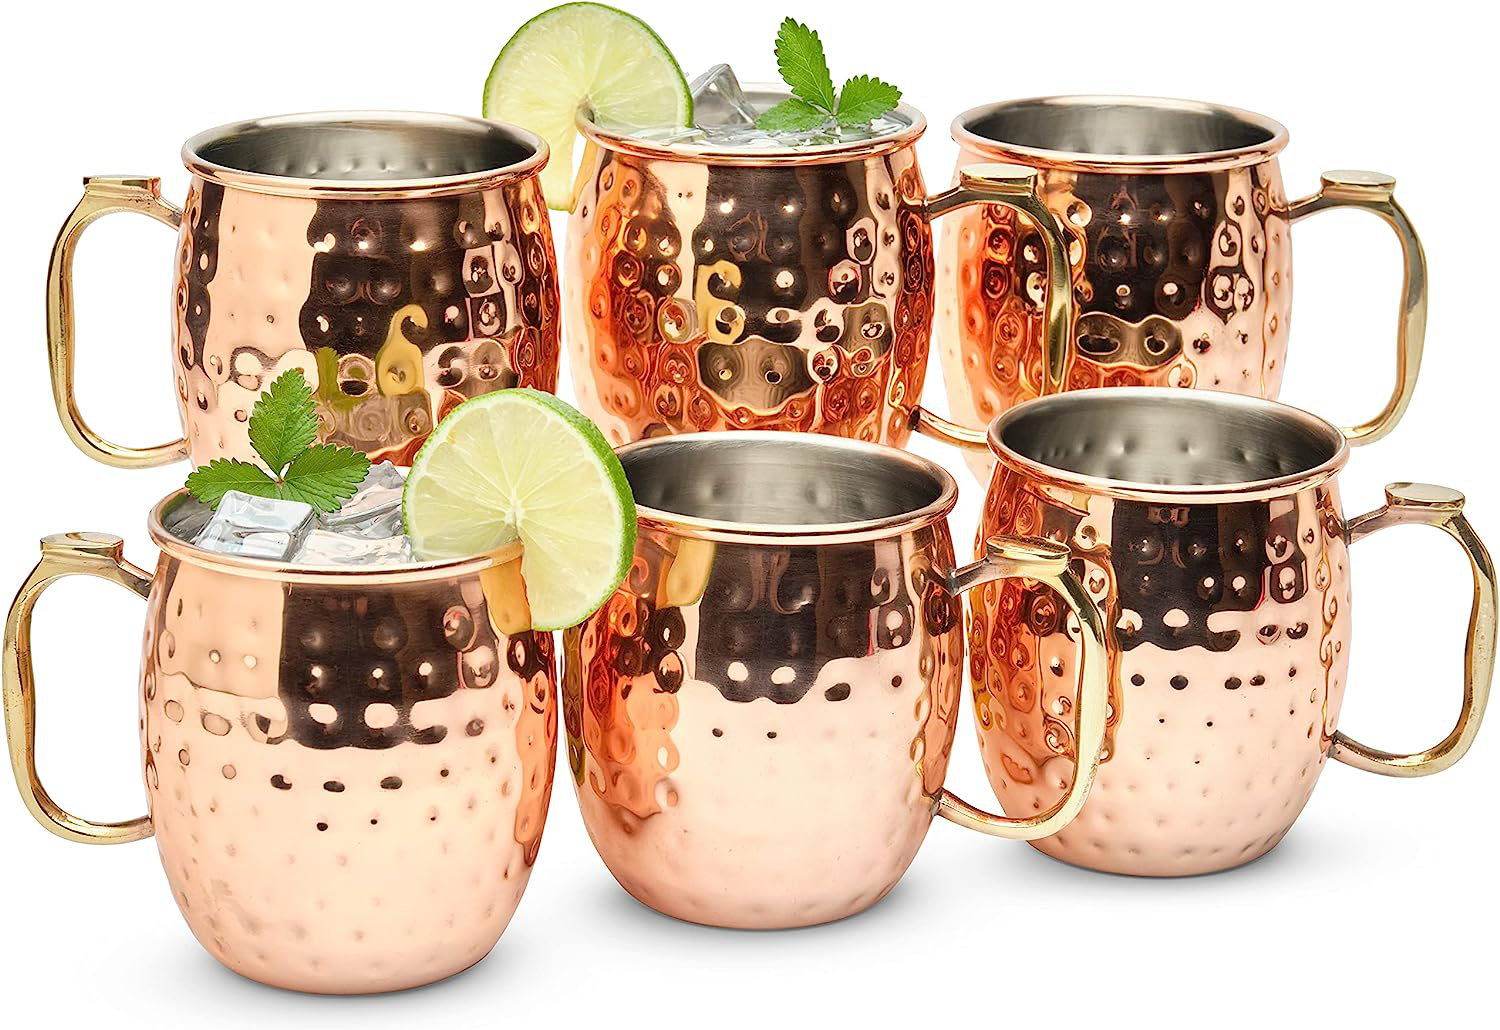 Moscow Mule Mugs Handcrafted Copper Mugs Food-Safe Stainless Steel Lining  Cups Large-Capacity Hammered Mugs for Iced Drinks